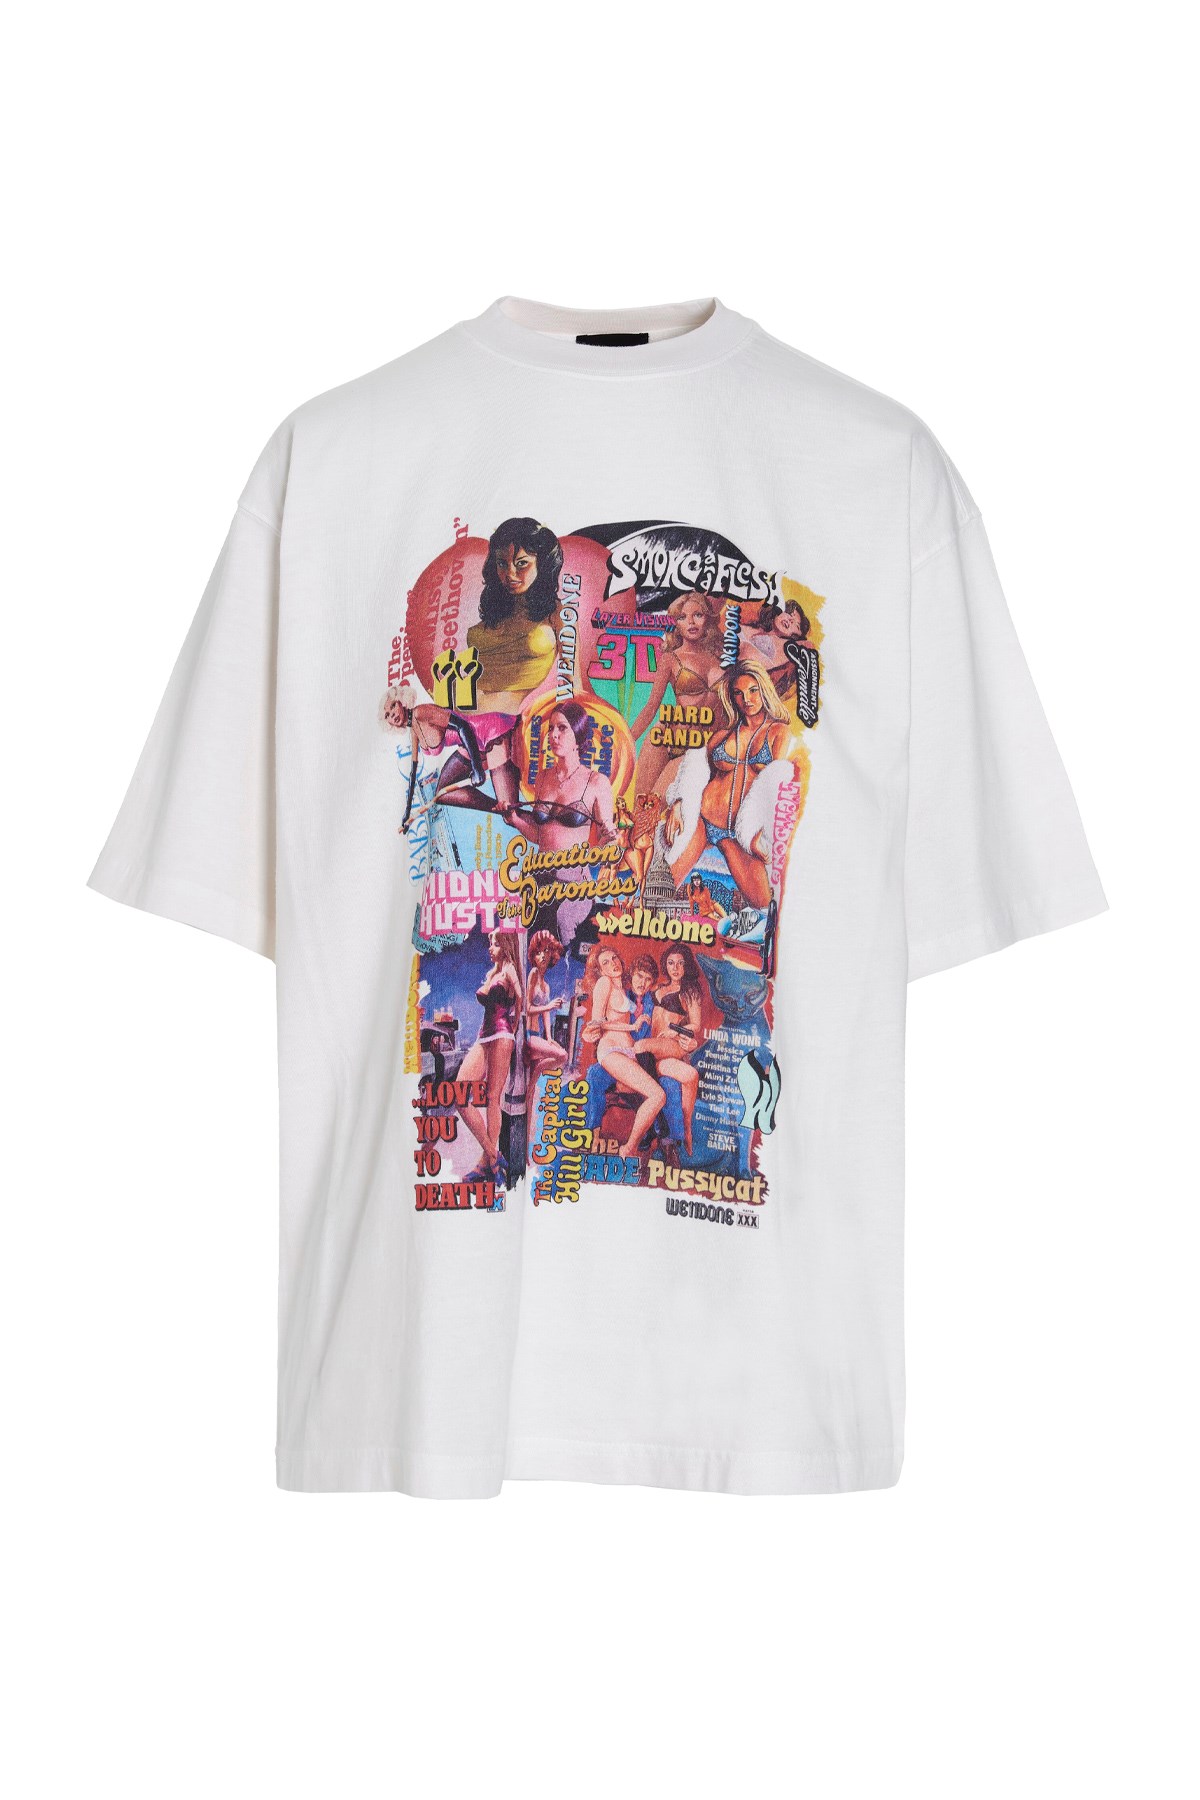 WE11DONE 'New Movie Collage' Unisex T-Shirt